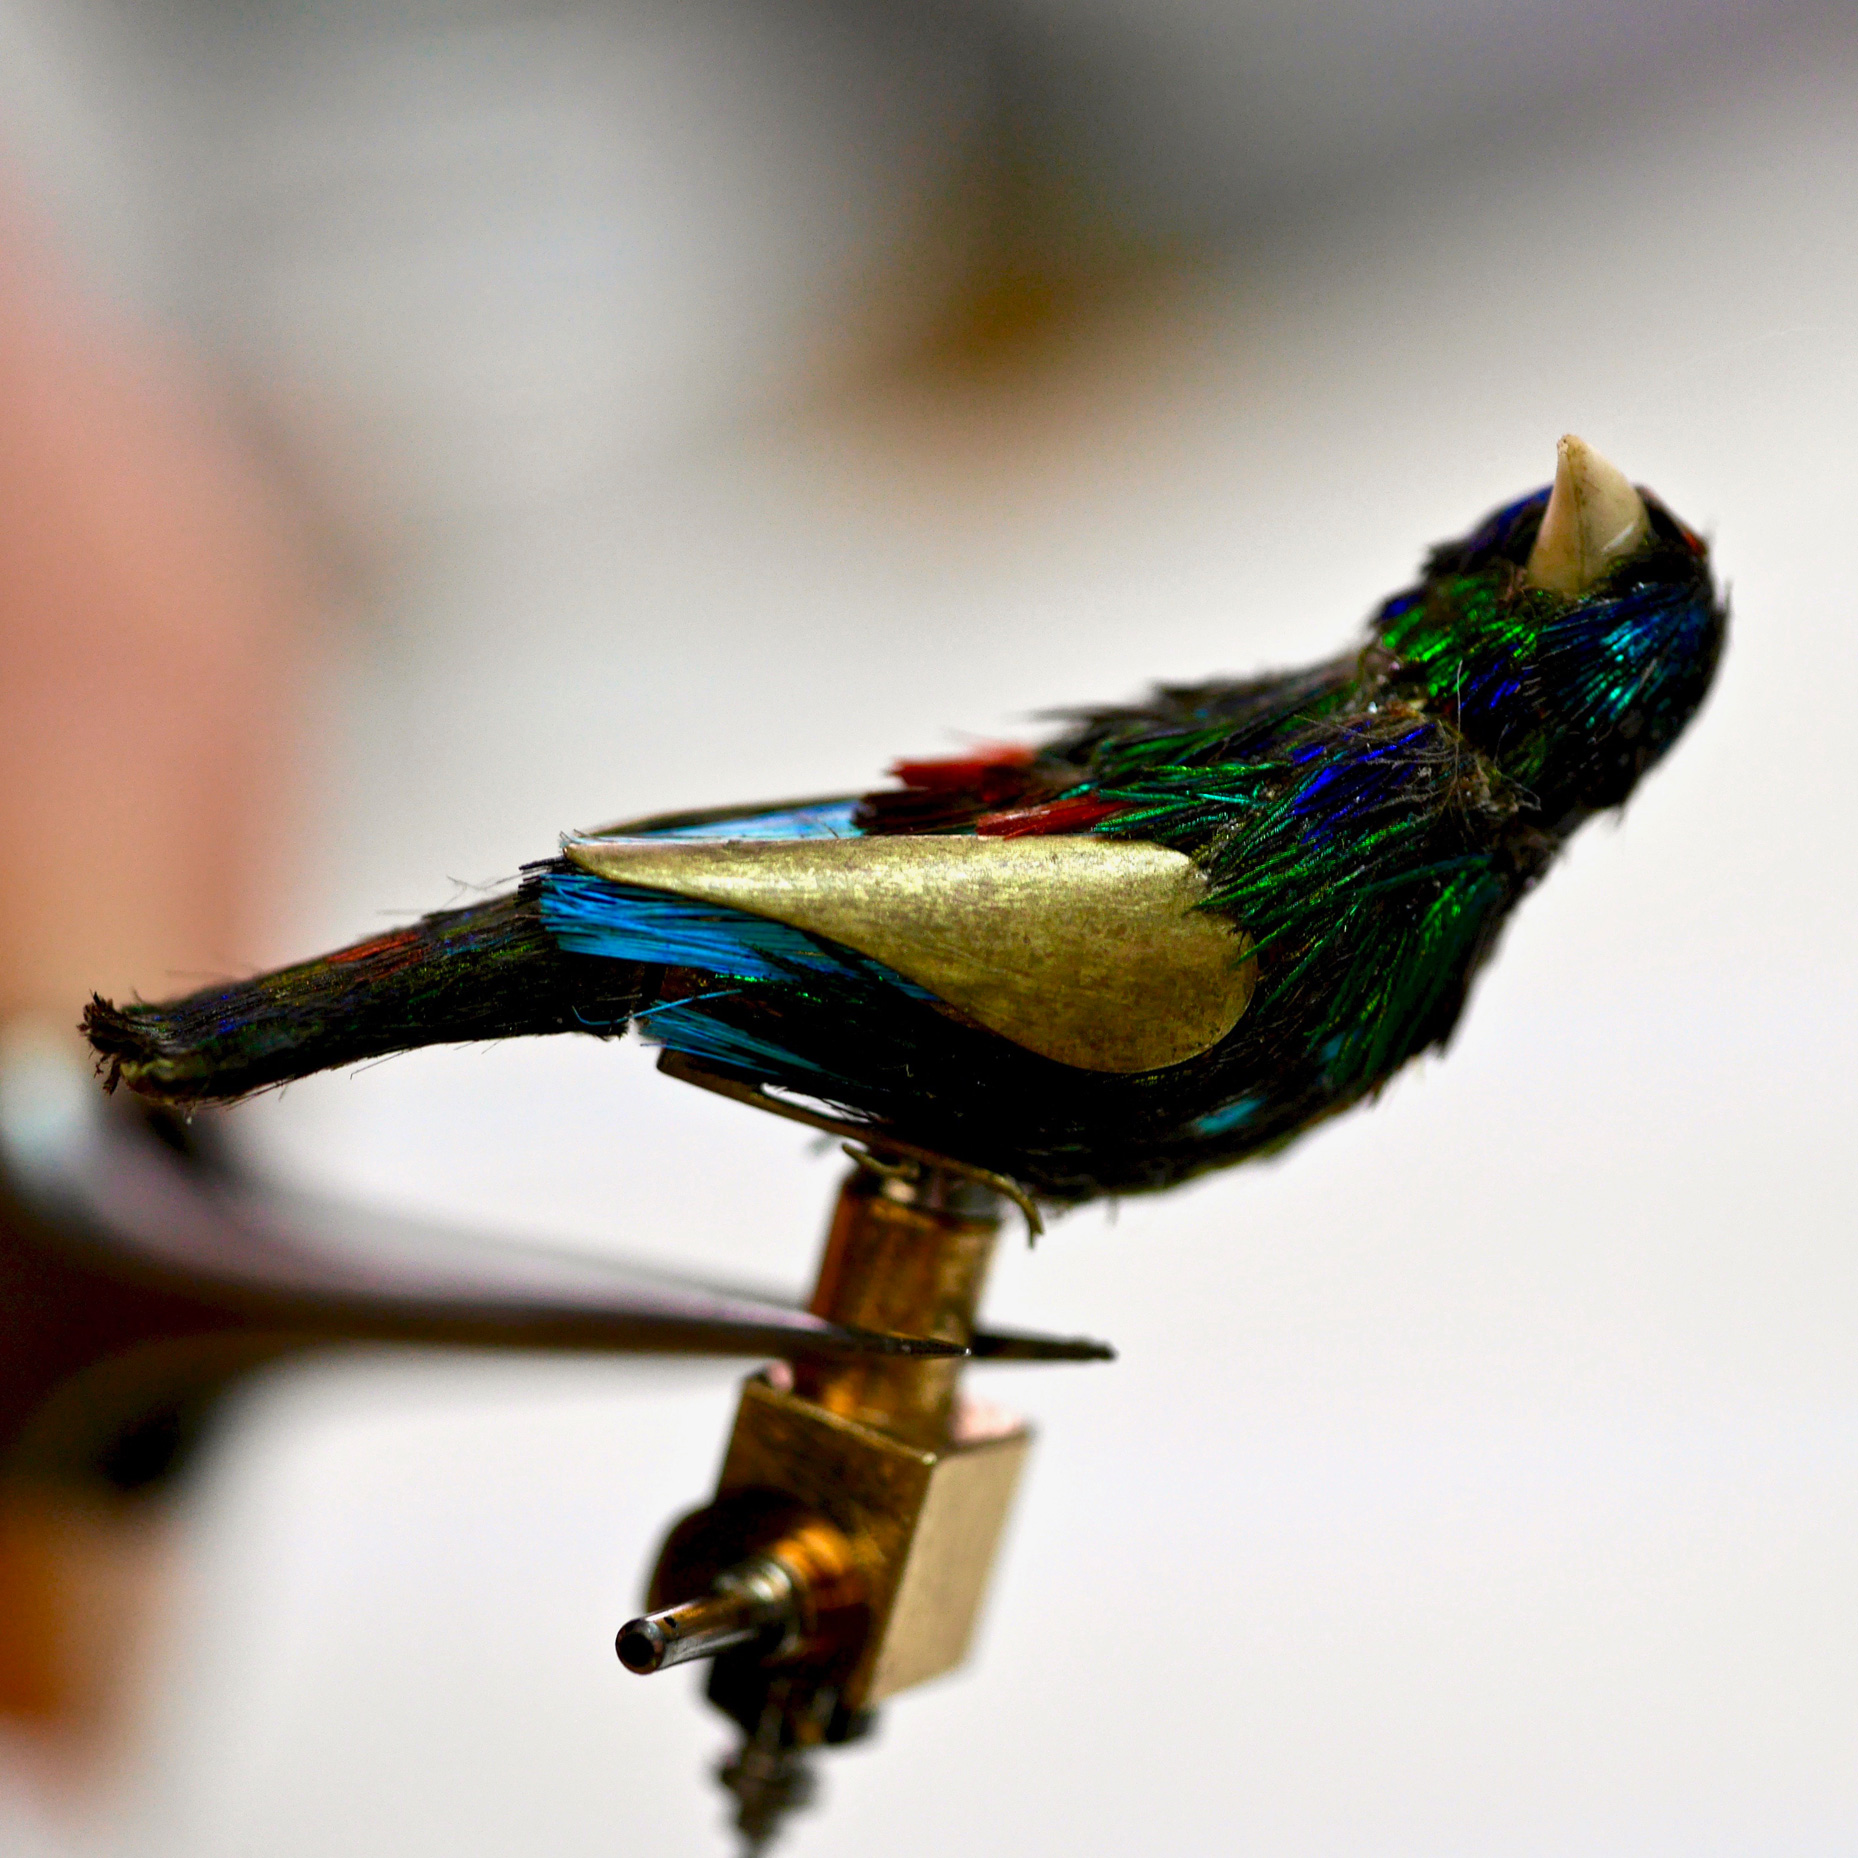 Close-up of a small bird from a music box